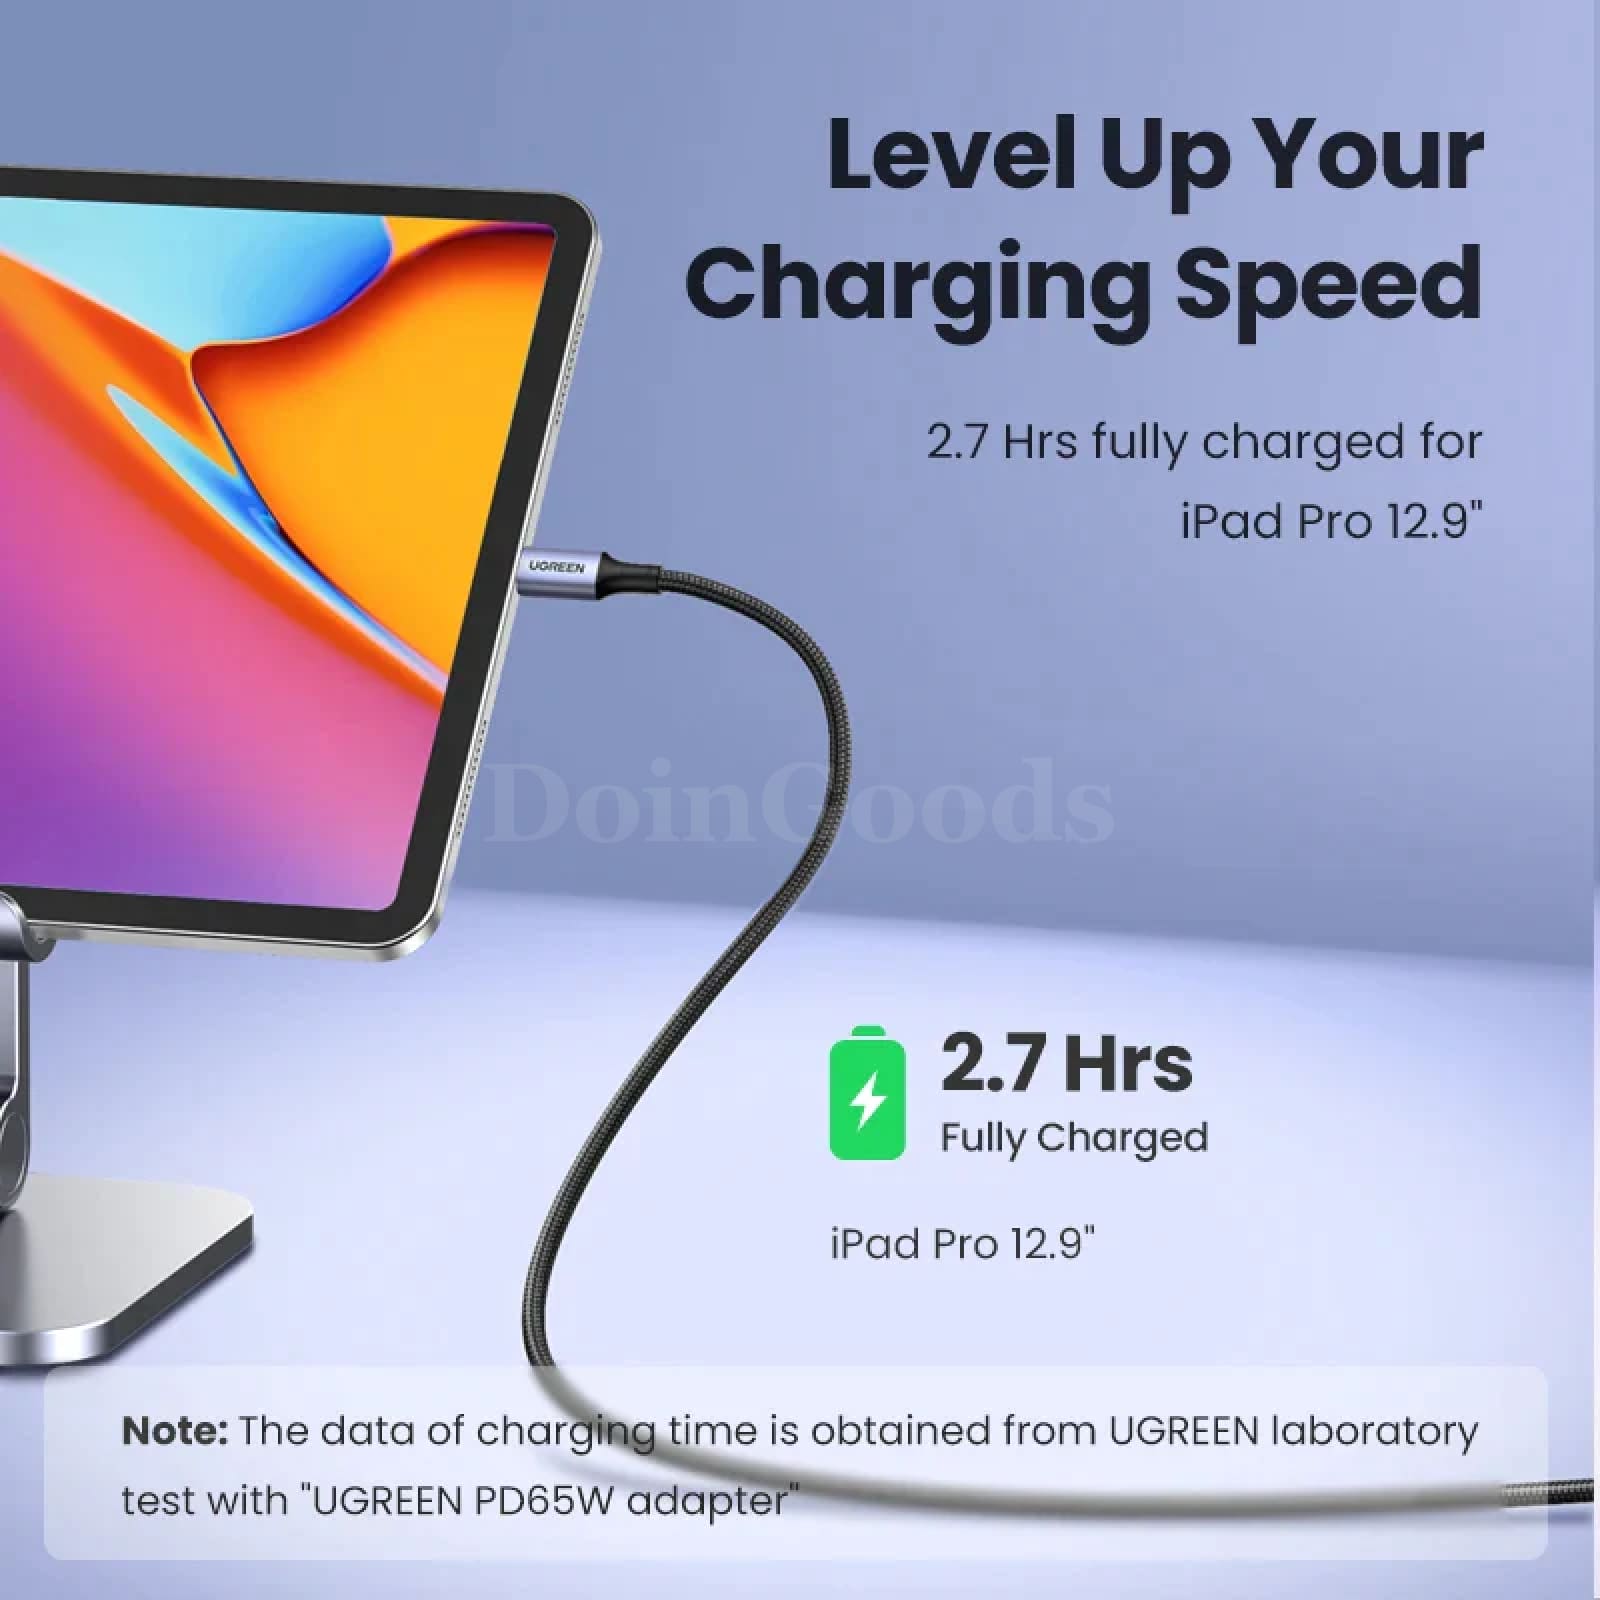 Ugreen 100W 3M Usb Type C To Cable For Macbook Ipad Samsung Xiaomi Pd 5A Fast 301635